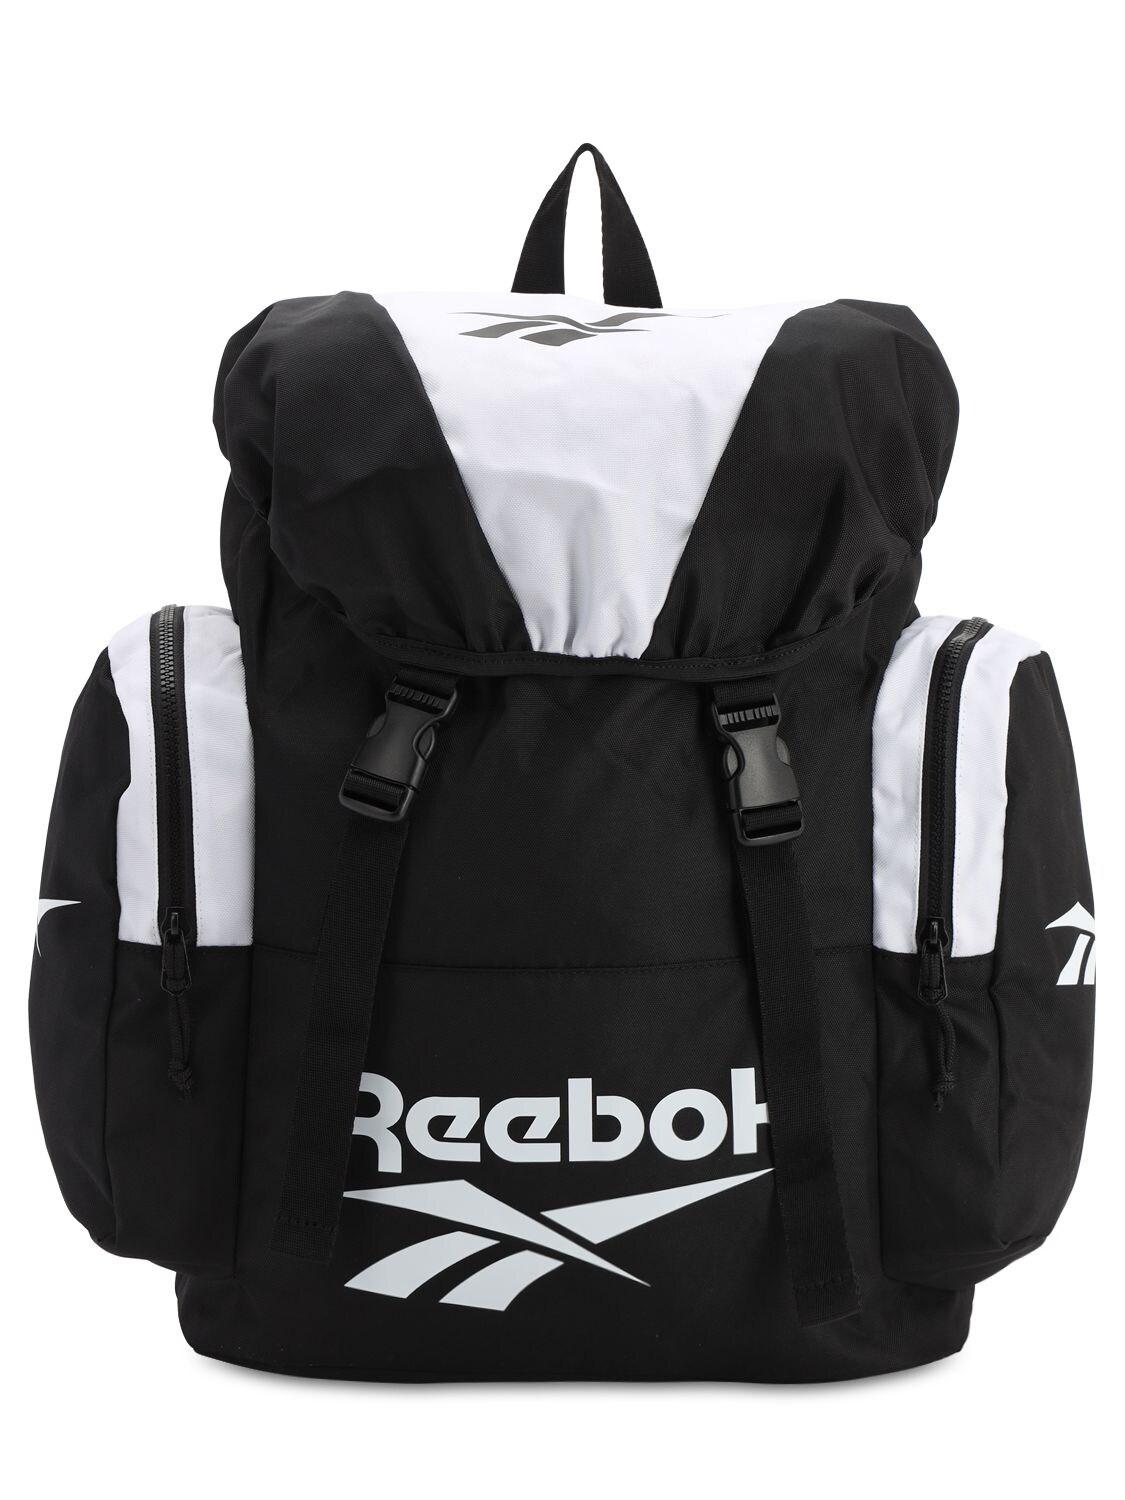 Reebok Classics Archive Backpack in Black - Lyst